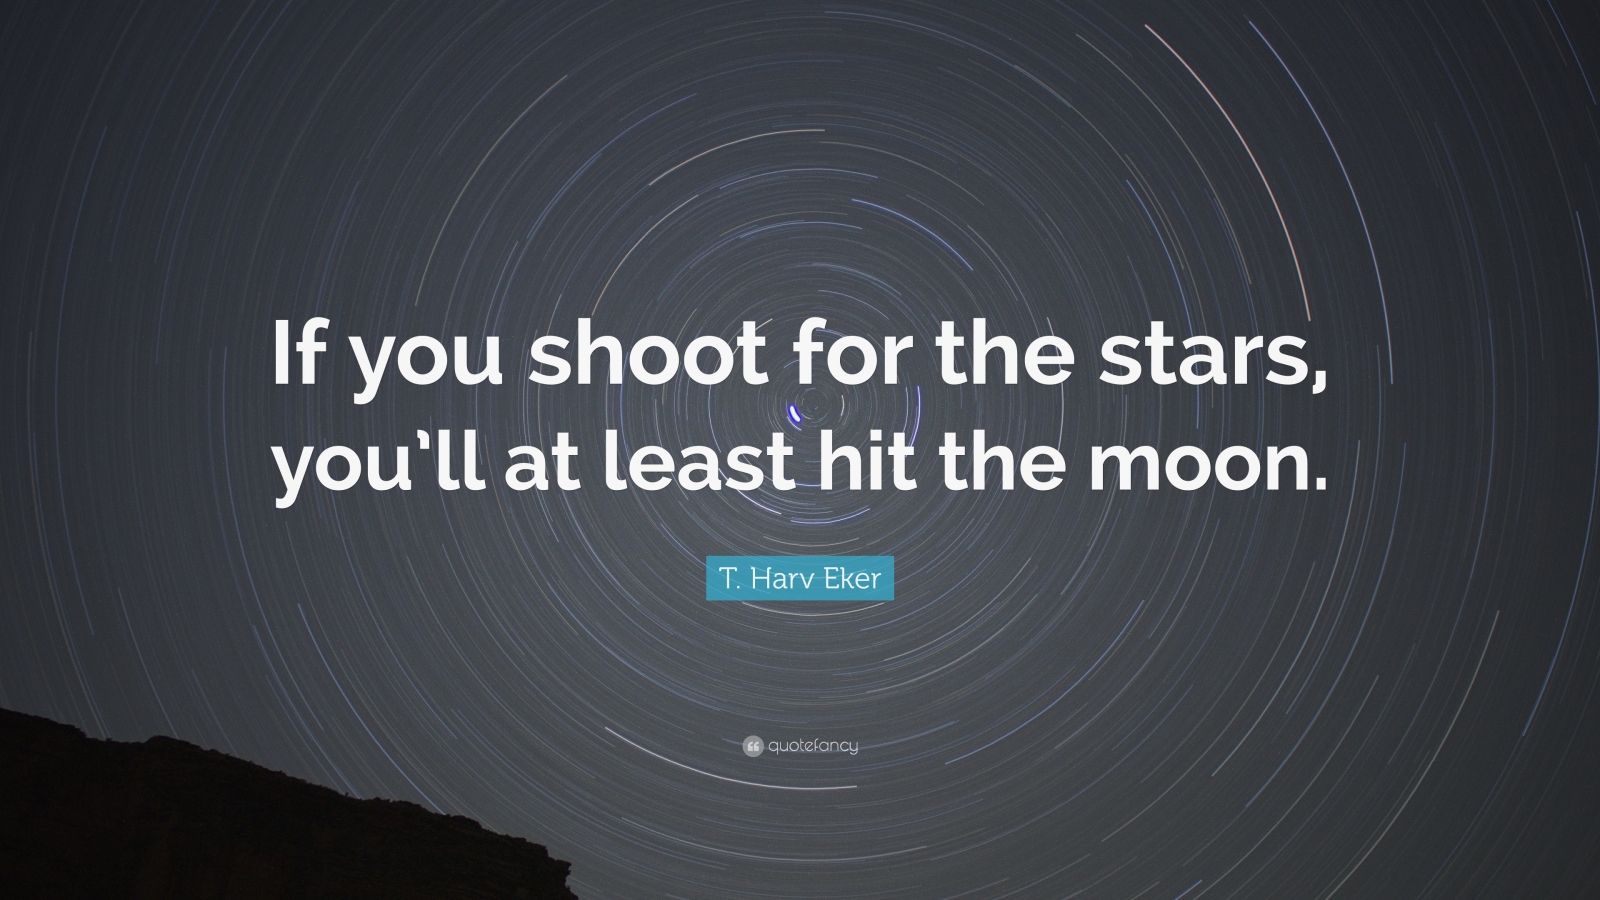 4790759 T Harv Eker Quote If you shoot for the stars you ll at least hit